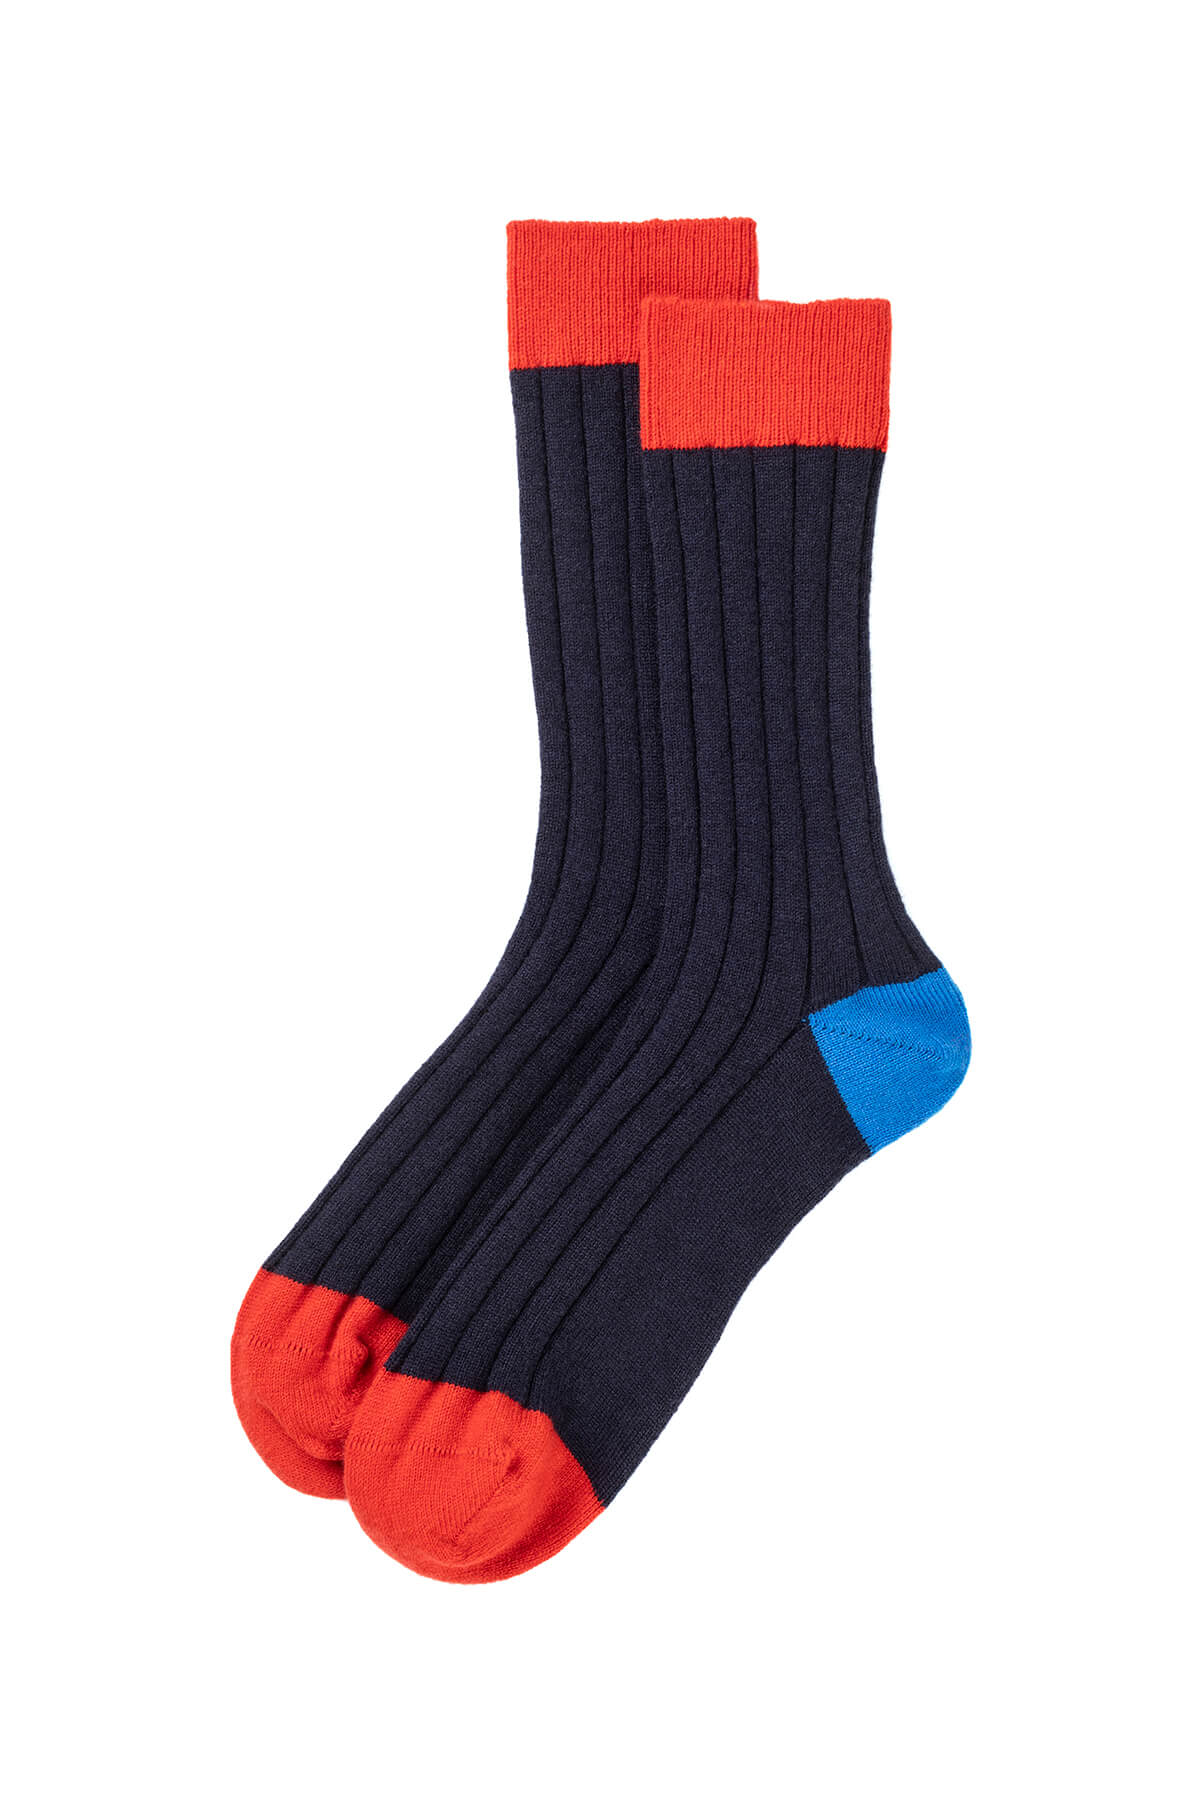 Johnstons of Elgin Men's Colour Block Socks in Navy with a Blue Heel and Red Toe and Welt HBN00010Q23789